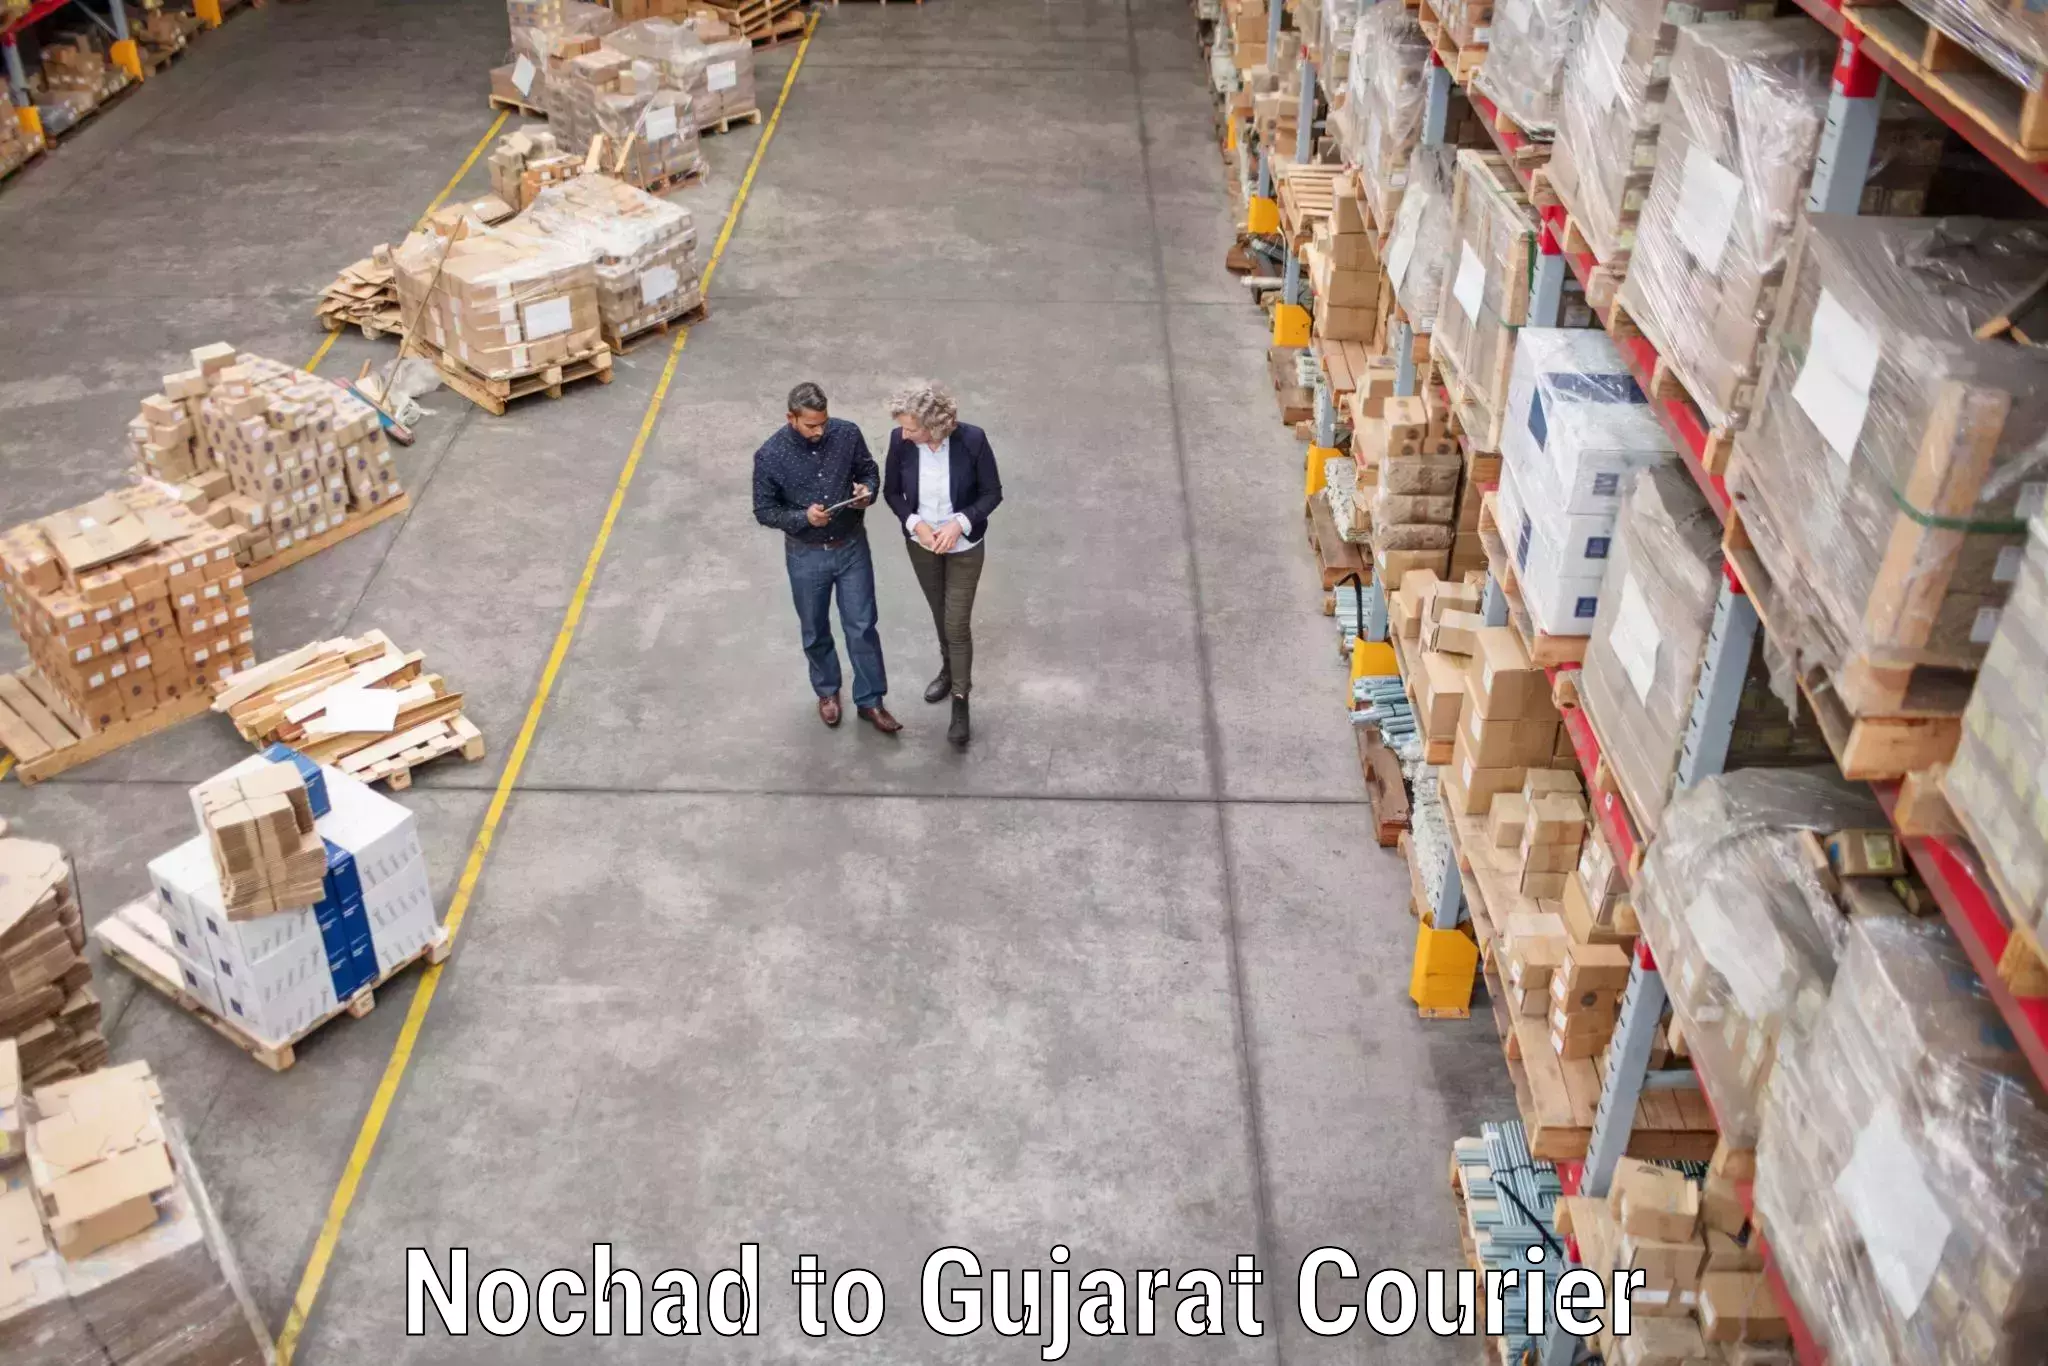 Moving and packing experts Nochad to Gujarat